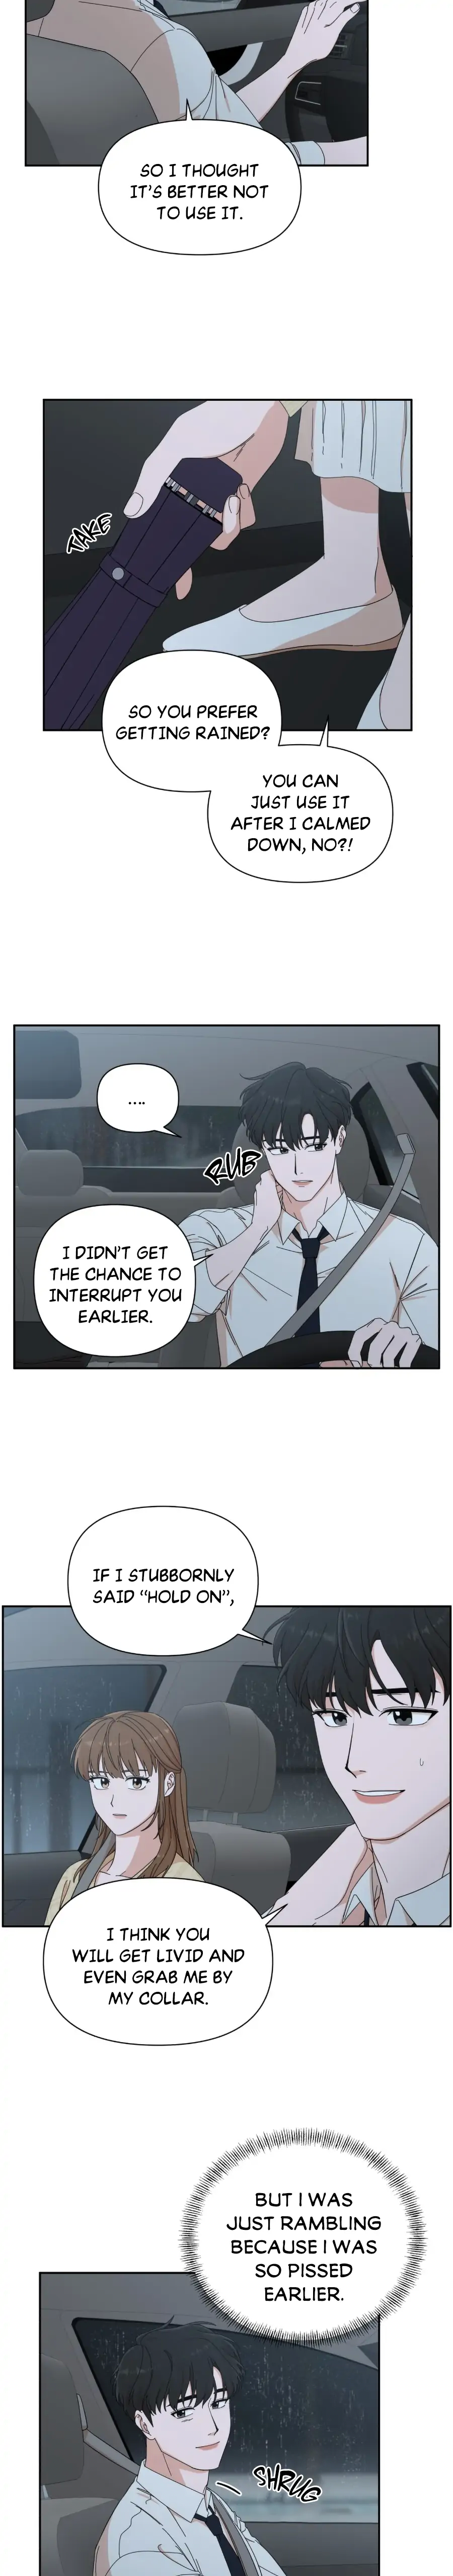 The Man with Pretty Lips Chapter 11 - Page 13